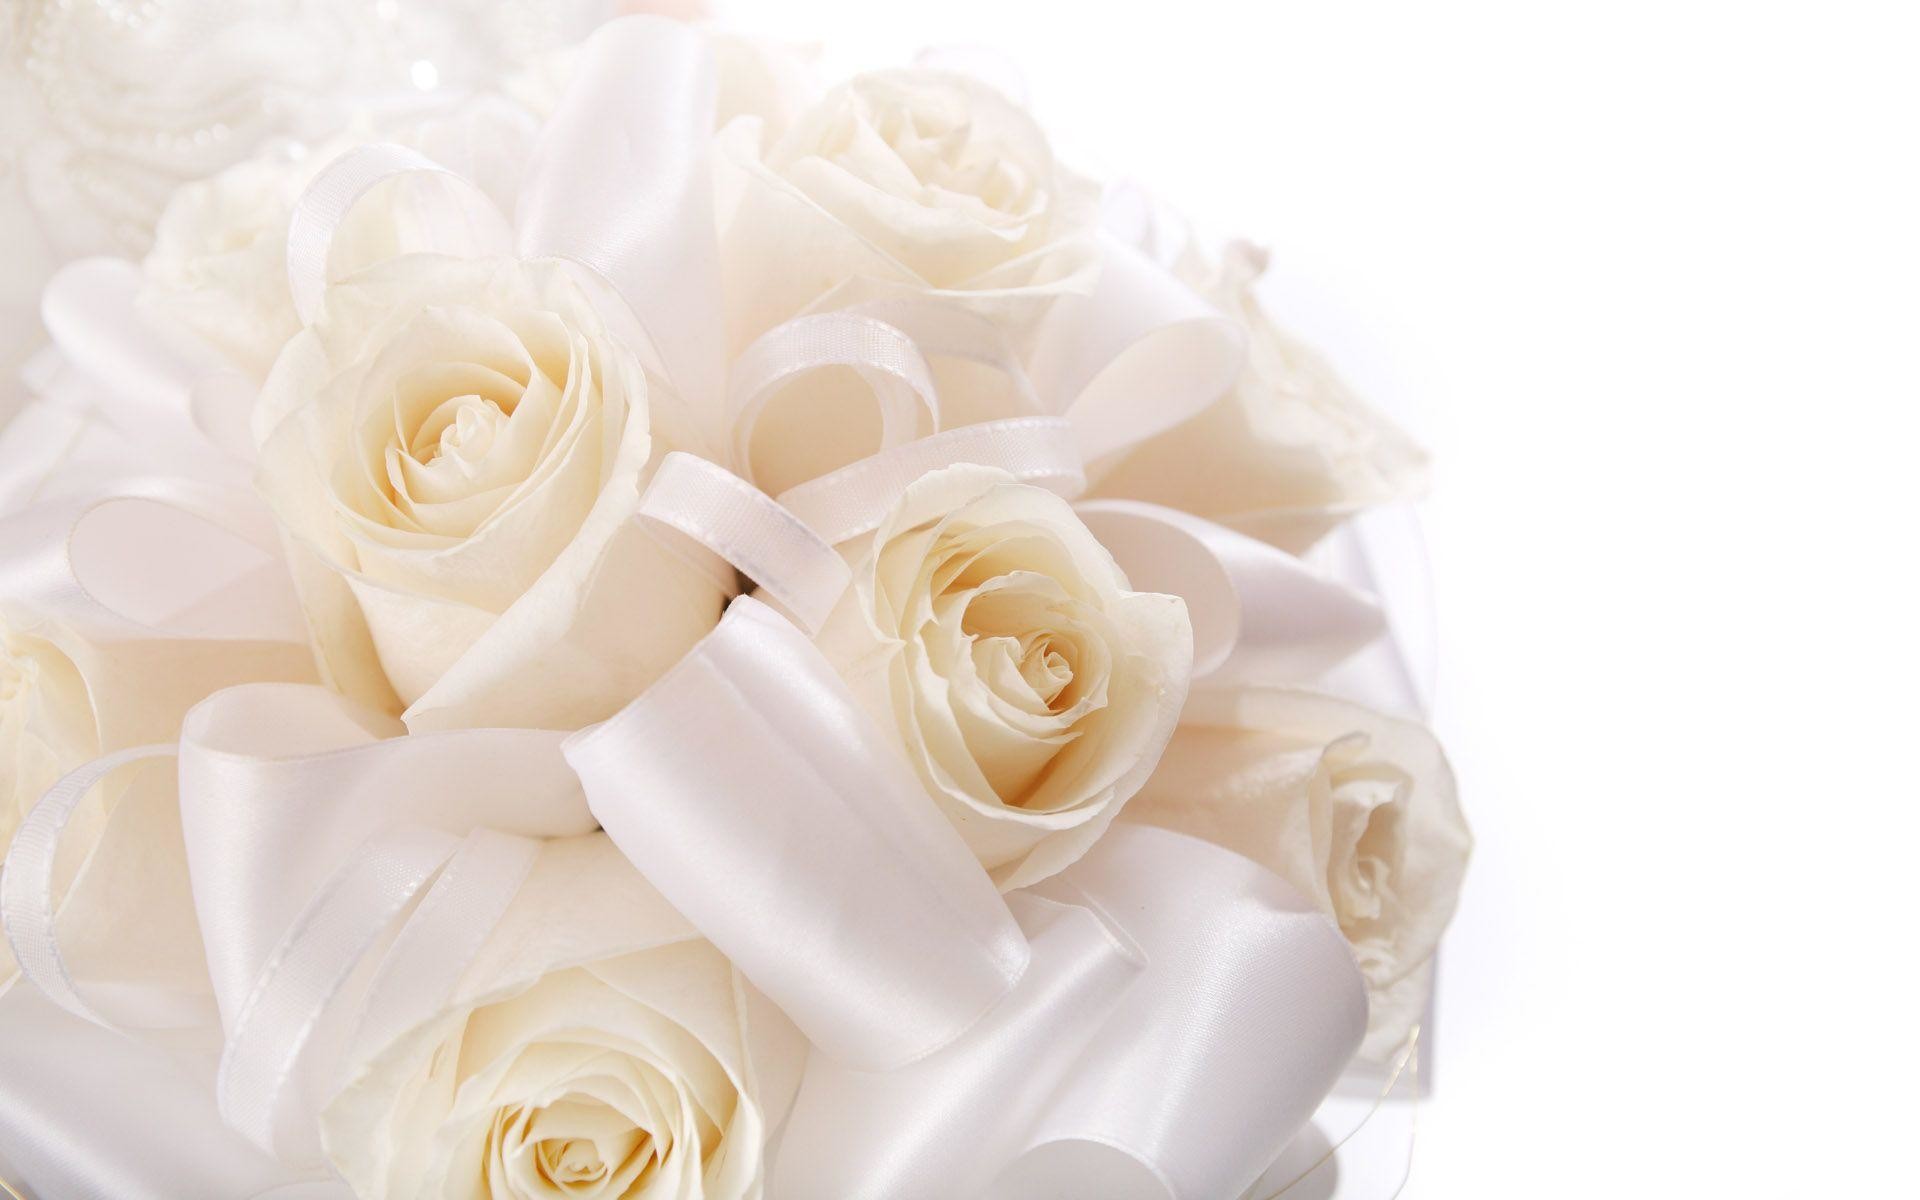 Wedding Rings And Flowers Background Giant Design 1920x1200